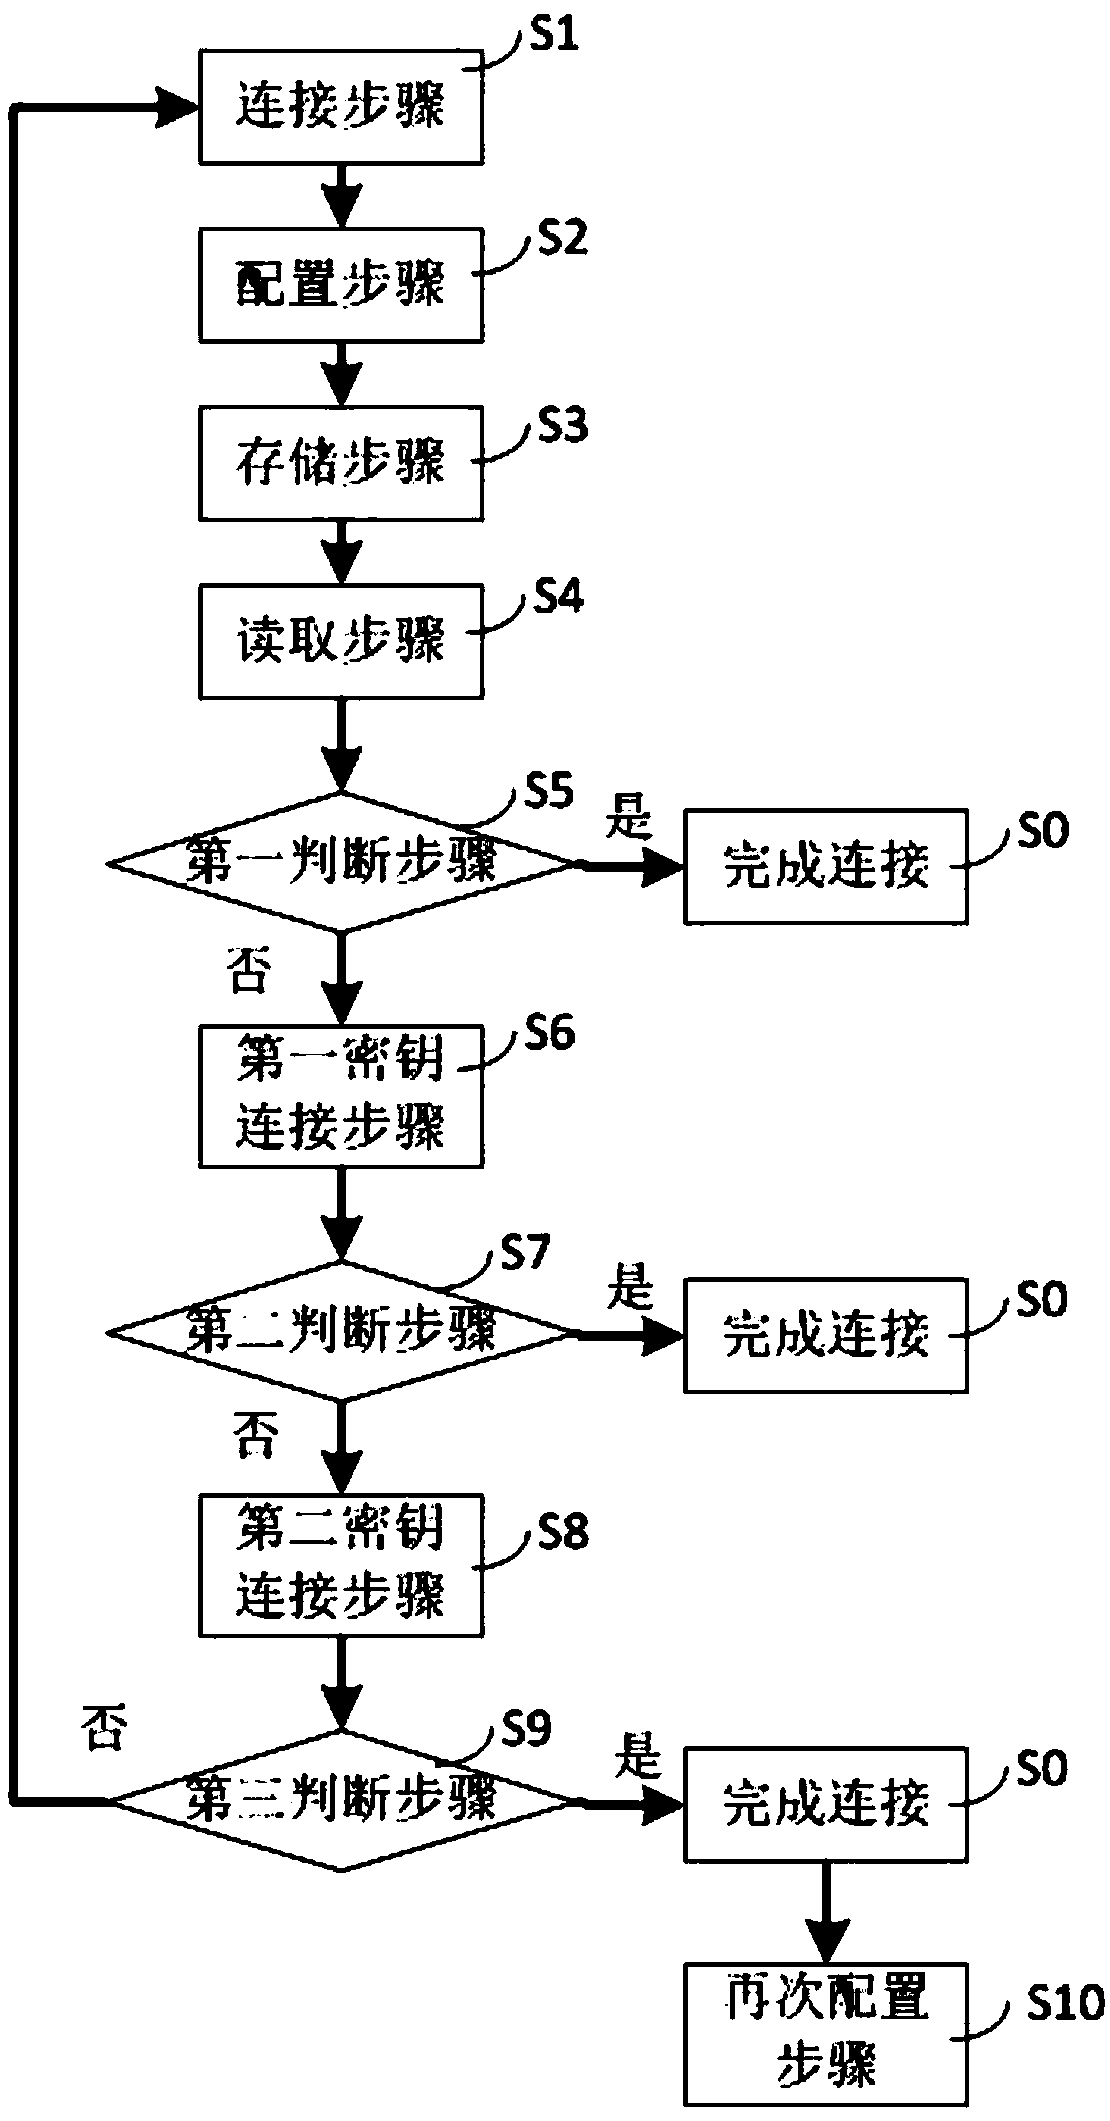 Device network access method based on PMK